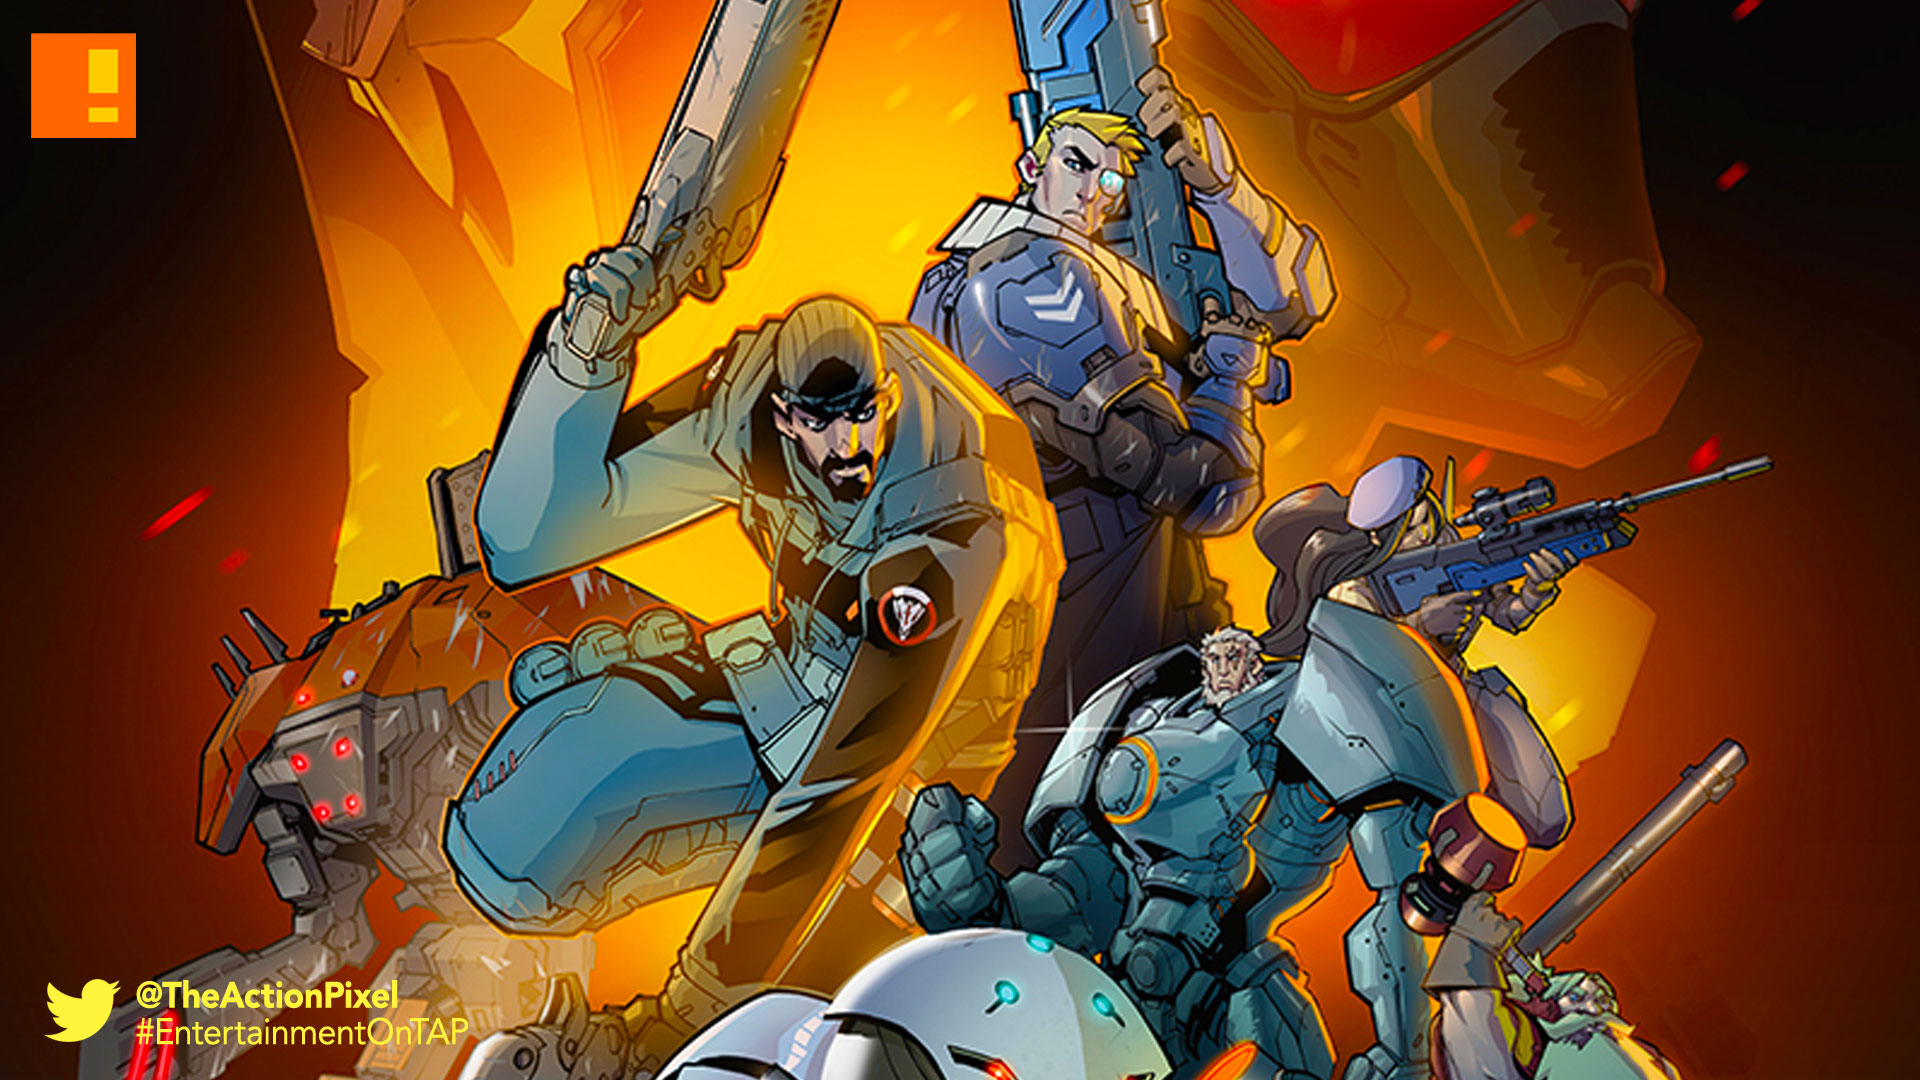 overwatch, First strike, comic, blizzard, blizzard entertainment, graphic novel, comic, first person , shooter,